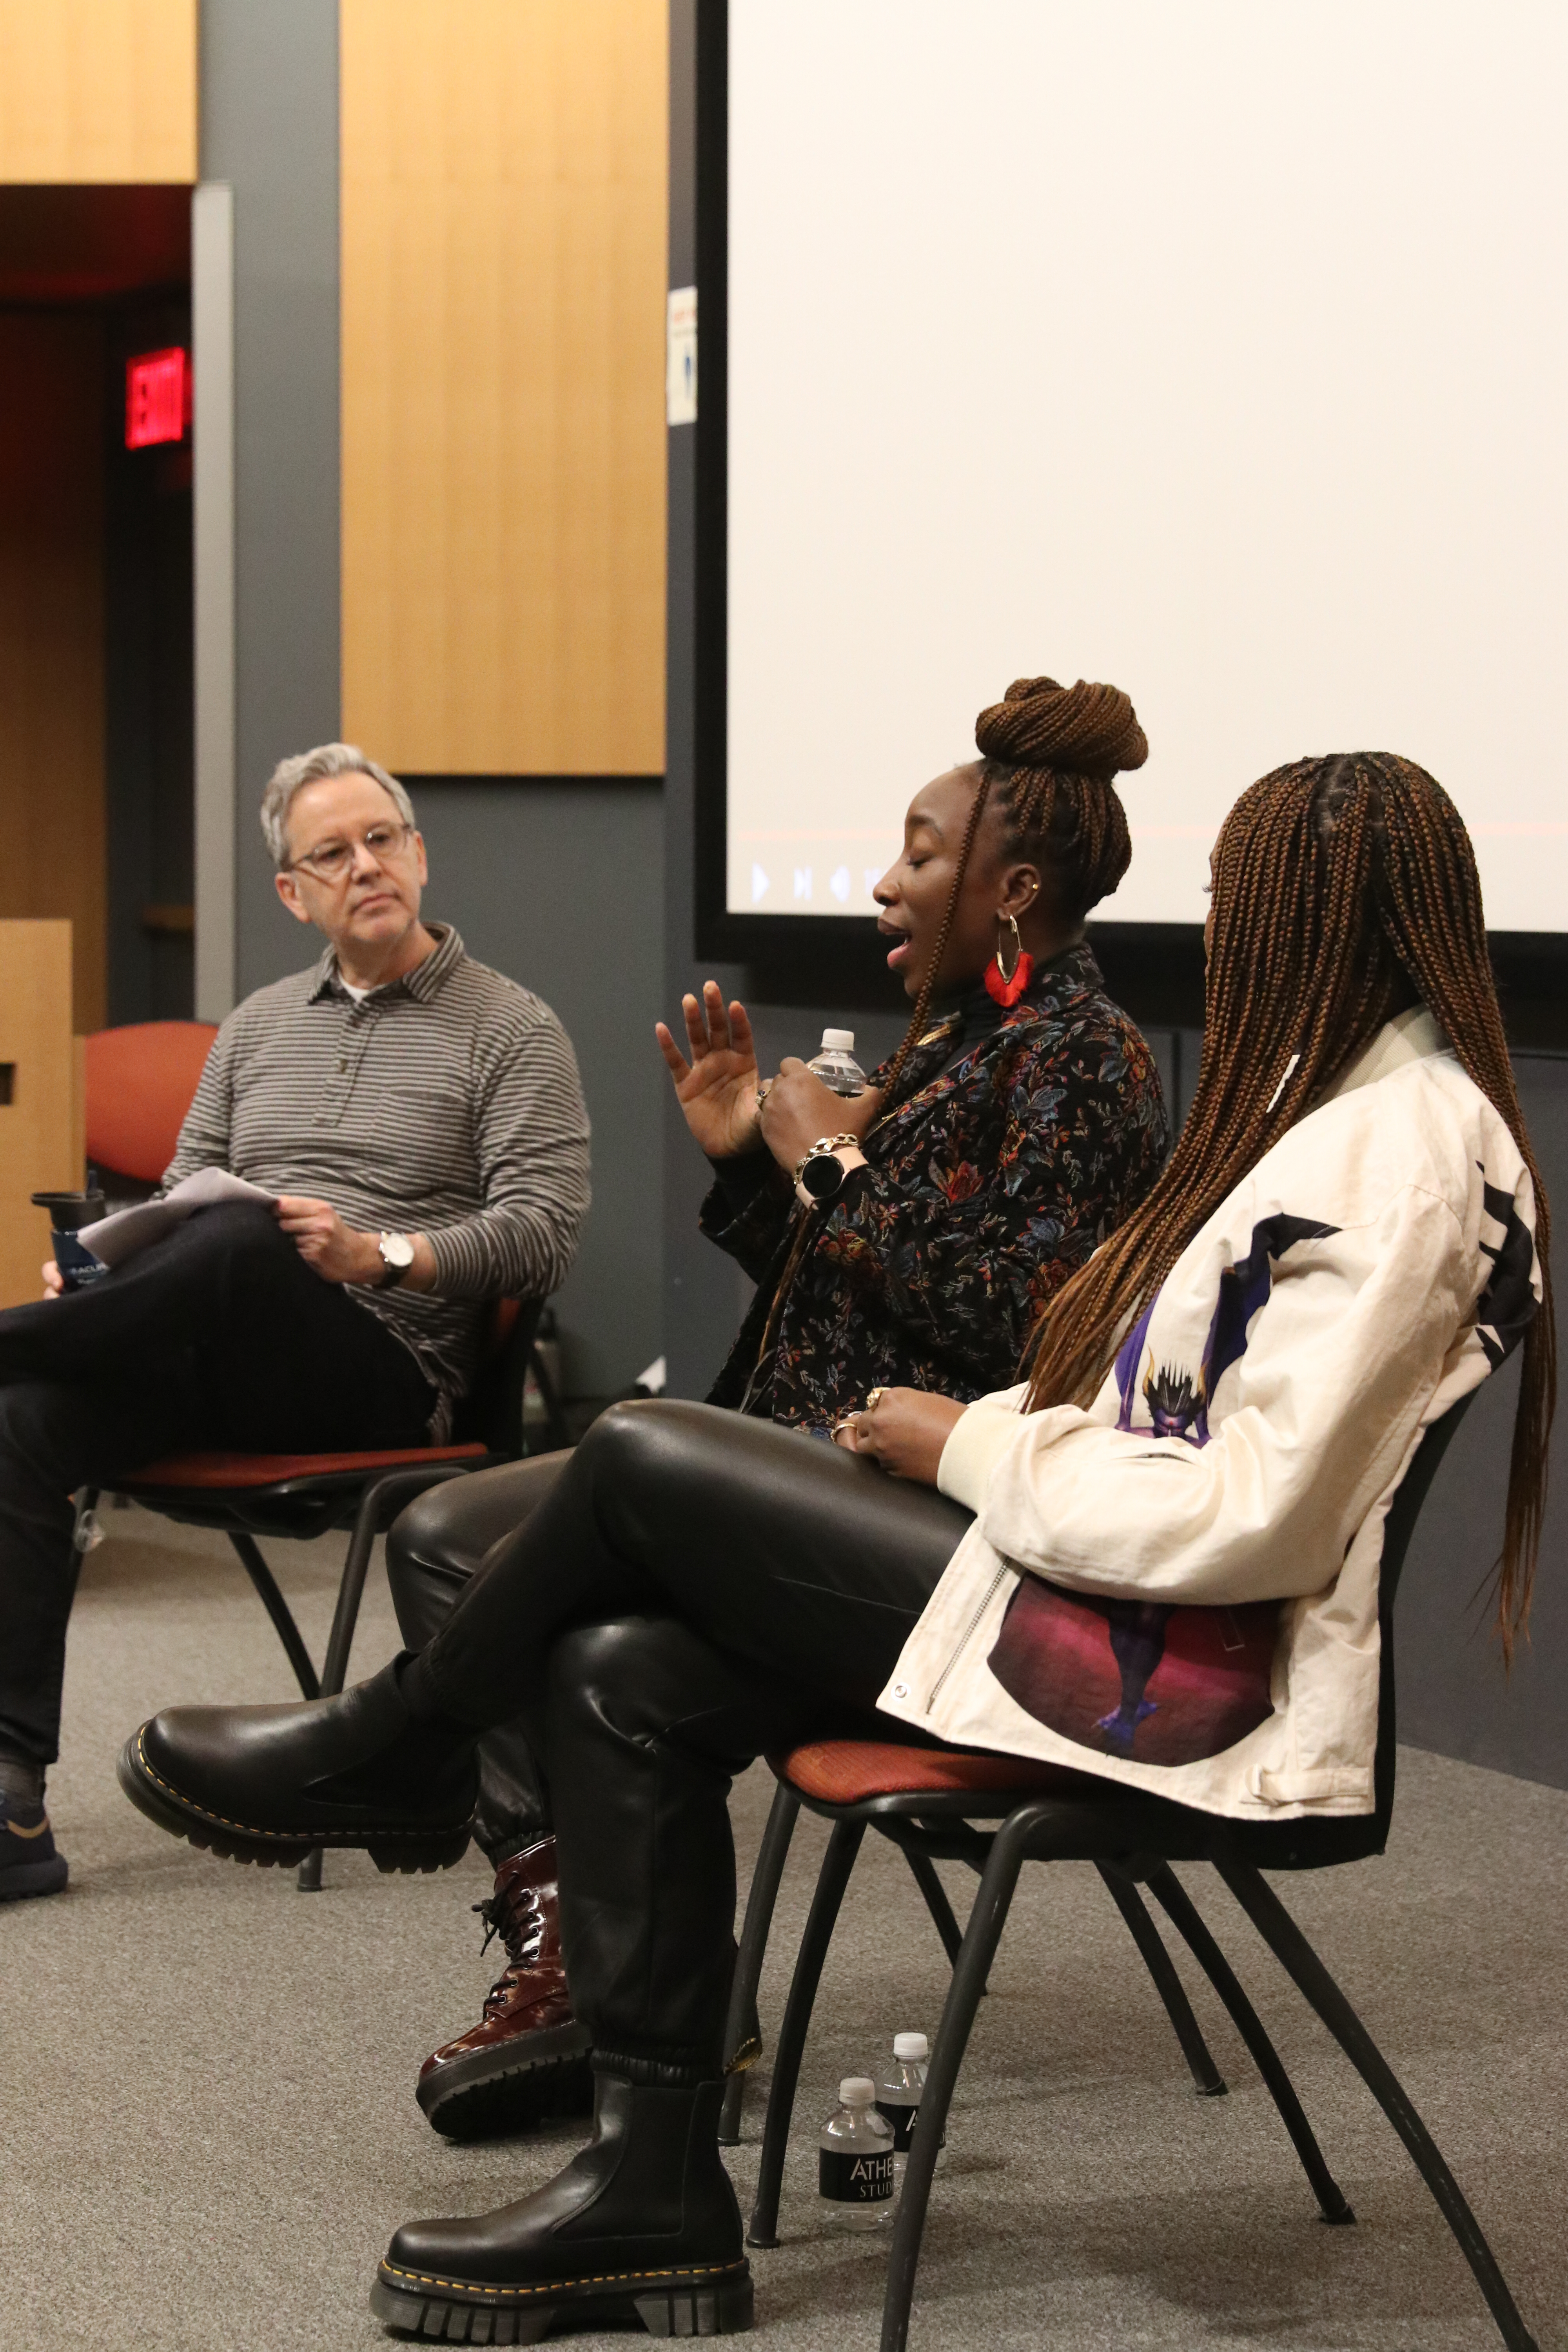 Adamma Ebo and her sister, Adanne Ebo, creators of "Honk for Jesus. Save Your Soul," visit with Neil Landau and students in the MFA Film and EMST program.